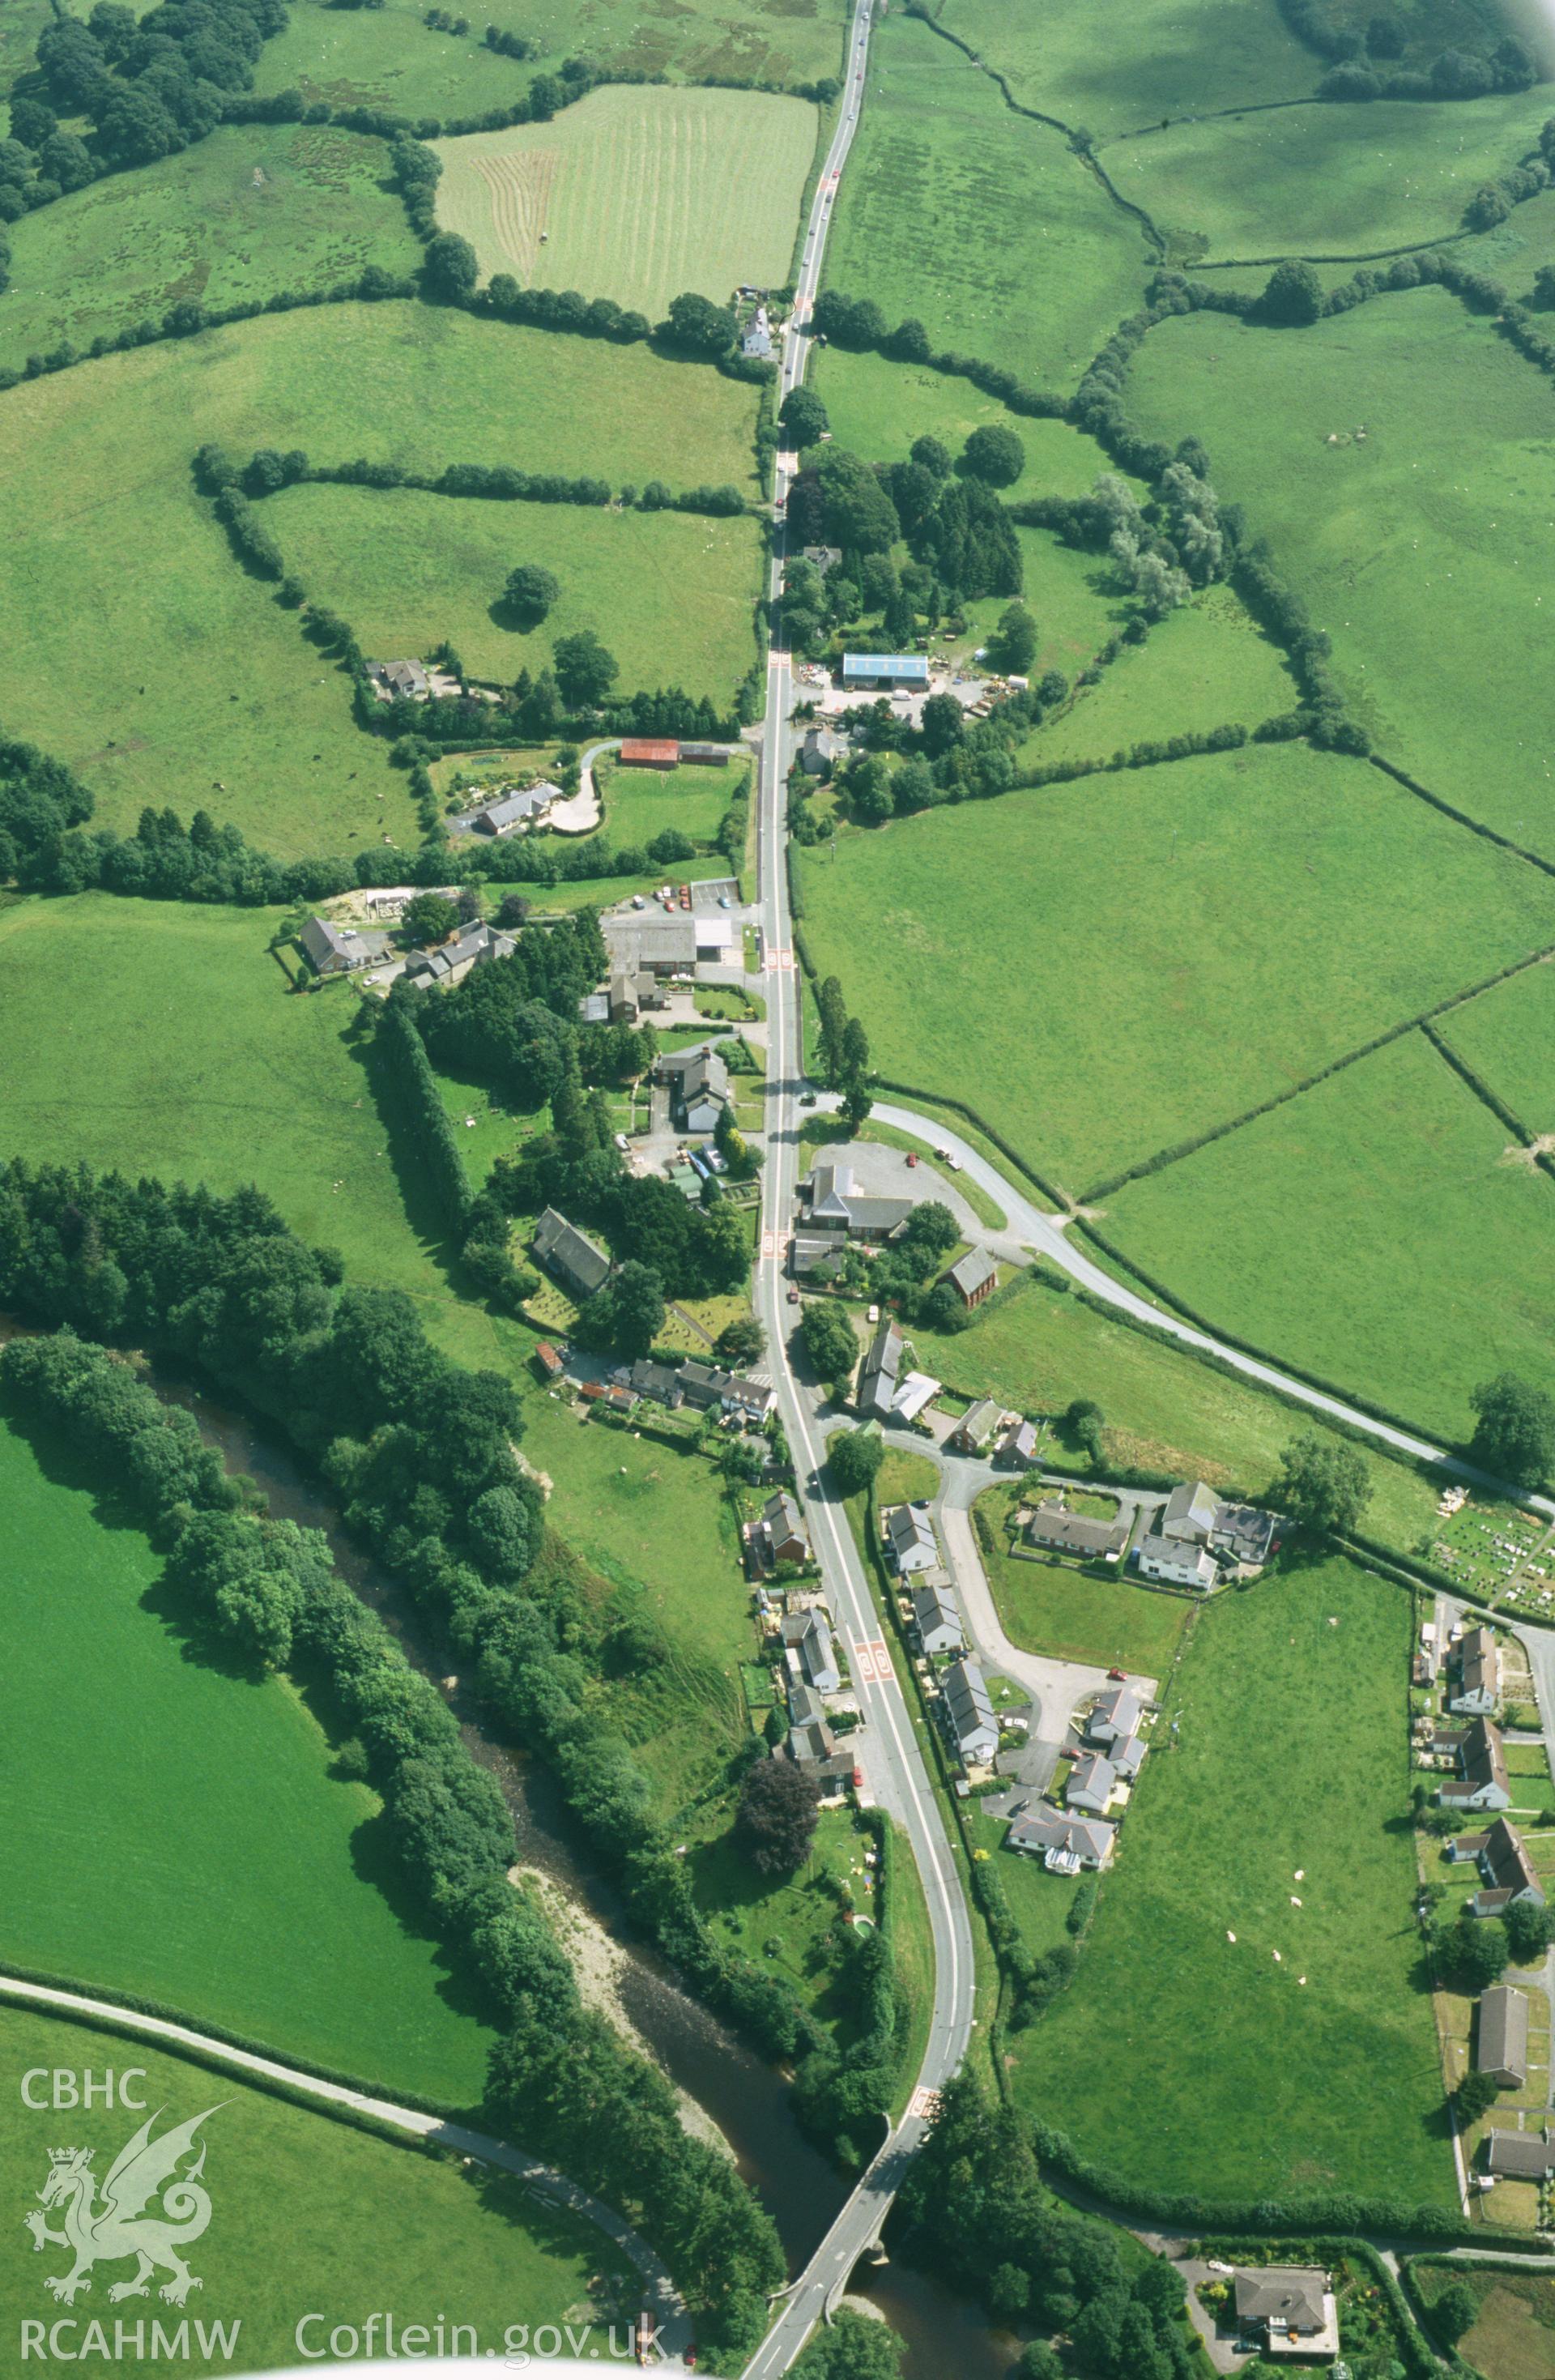 Slide of RCAHMW colour oblique aerial photograph of Llanerfyl aken by T.G. Driver, 2001.